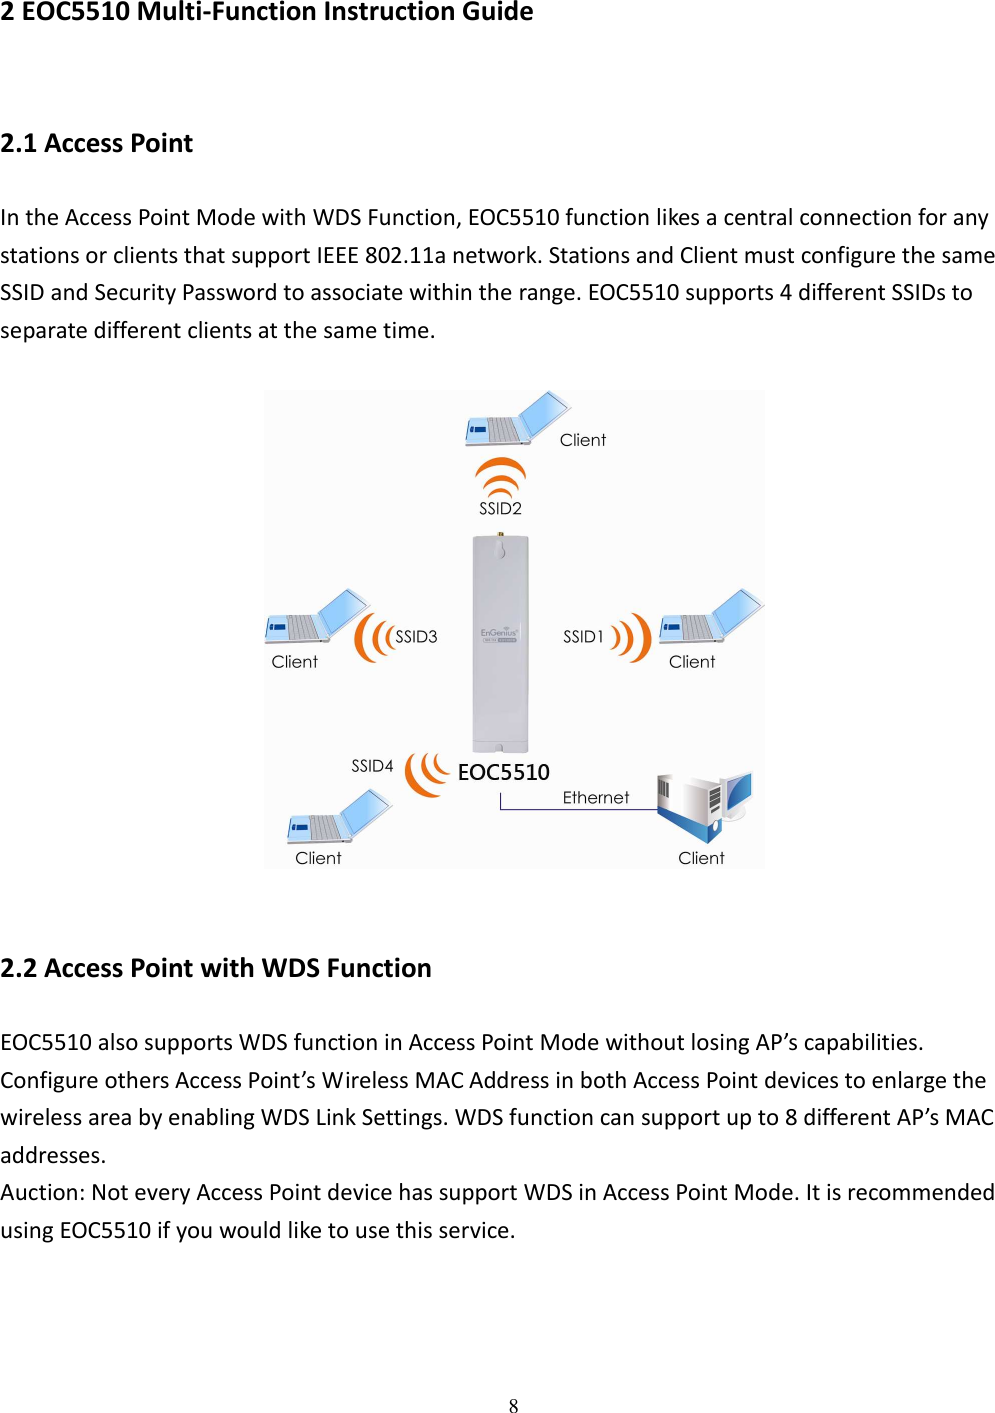 8   2 EOC5510 Multi-Function Instruction Guide 2.1 Access Point In the Access Point Mode with WDS Function, EOC5510 function likes a central connection for any stations or clients that support IEEE 802.11a network. Stations and Client must configure the same SSID and Security Password to associate within the range. EOC5510 supports 4 different SSIDs to separate different clients at the same time.    2.2 Access Point with WDS Function EOC5510 also supports WDS function in Access Point Mode without losing AP’s capabilities. Configure others Access Point’s Wireless MAC Address in both Access Point devices to enlarge the wireless area by enabling WDS Link Settings. WDS function can support up to 8 different AP’s MAC addresses. Auction: Not every Access Point device has support WDS in Access Point Mode. It is recommended using EOC5510 if you would like to use this service.    